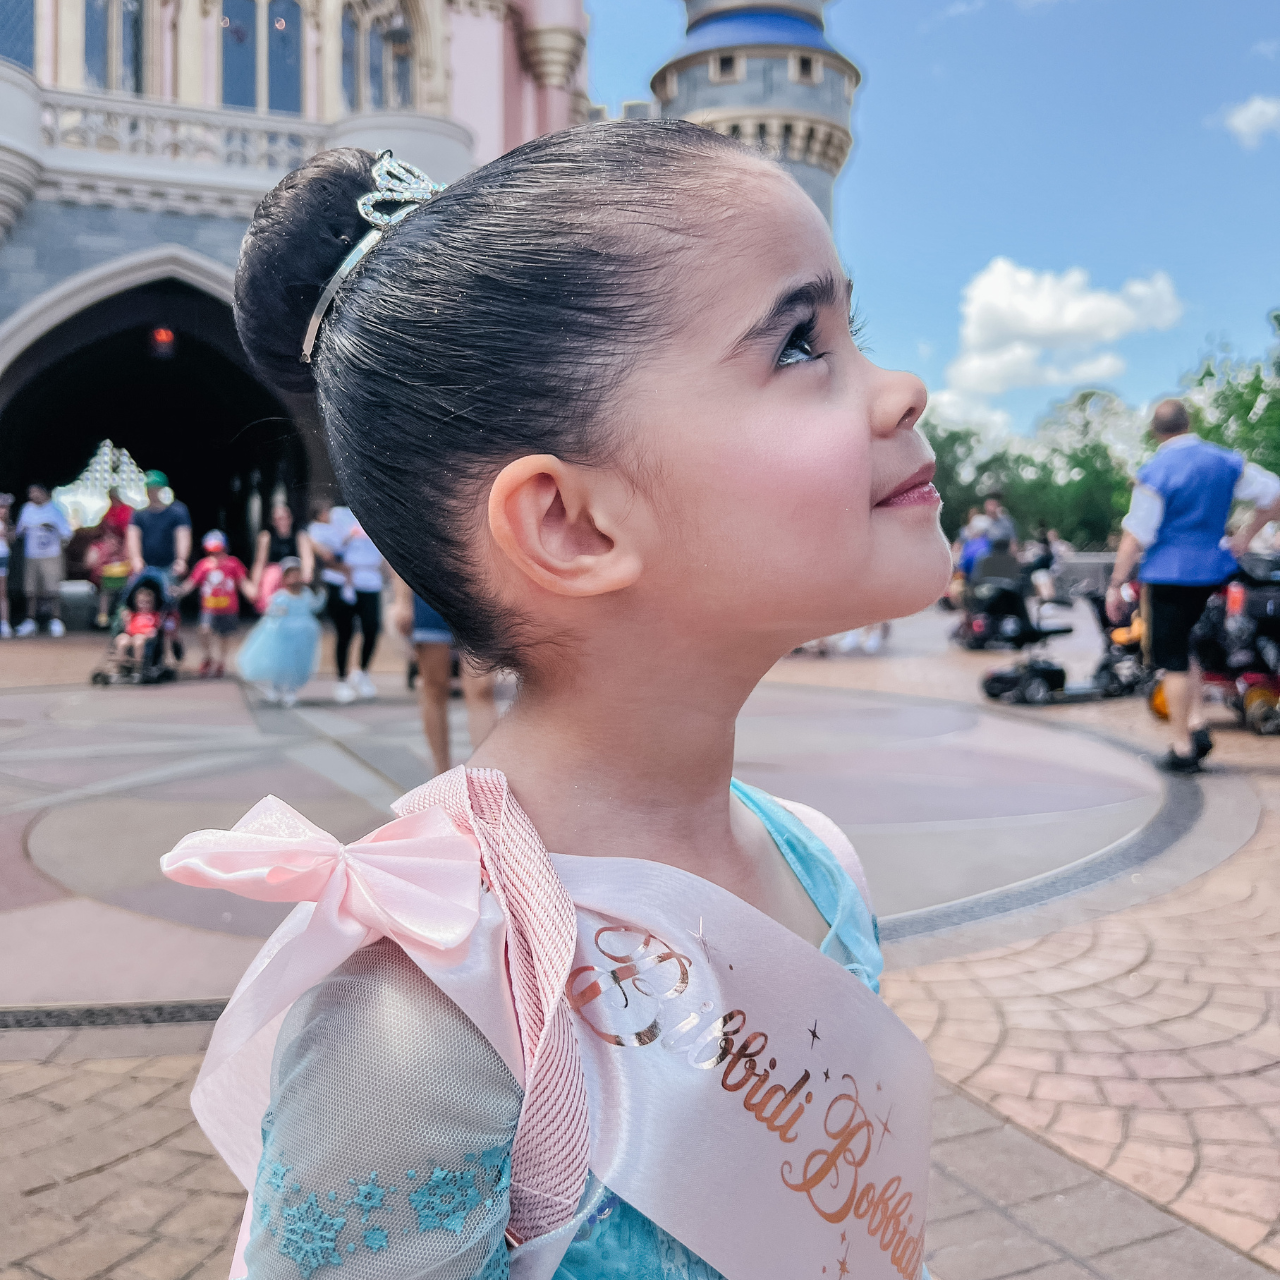 author megan's daughter standing in front of the castle after going to the bibbidi bobbidi boutique